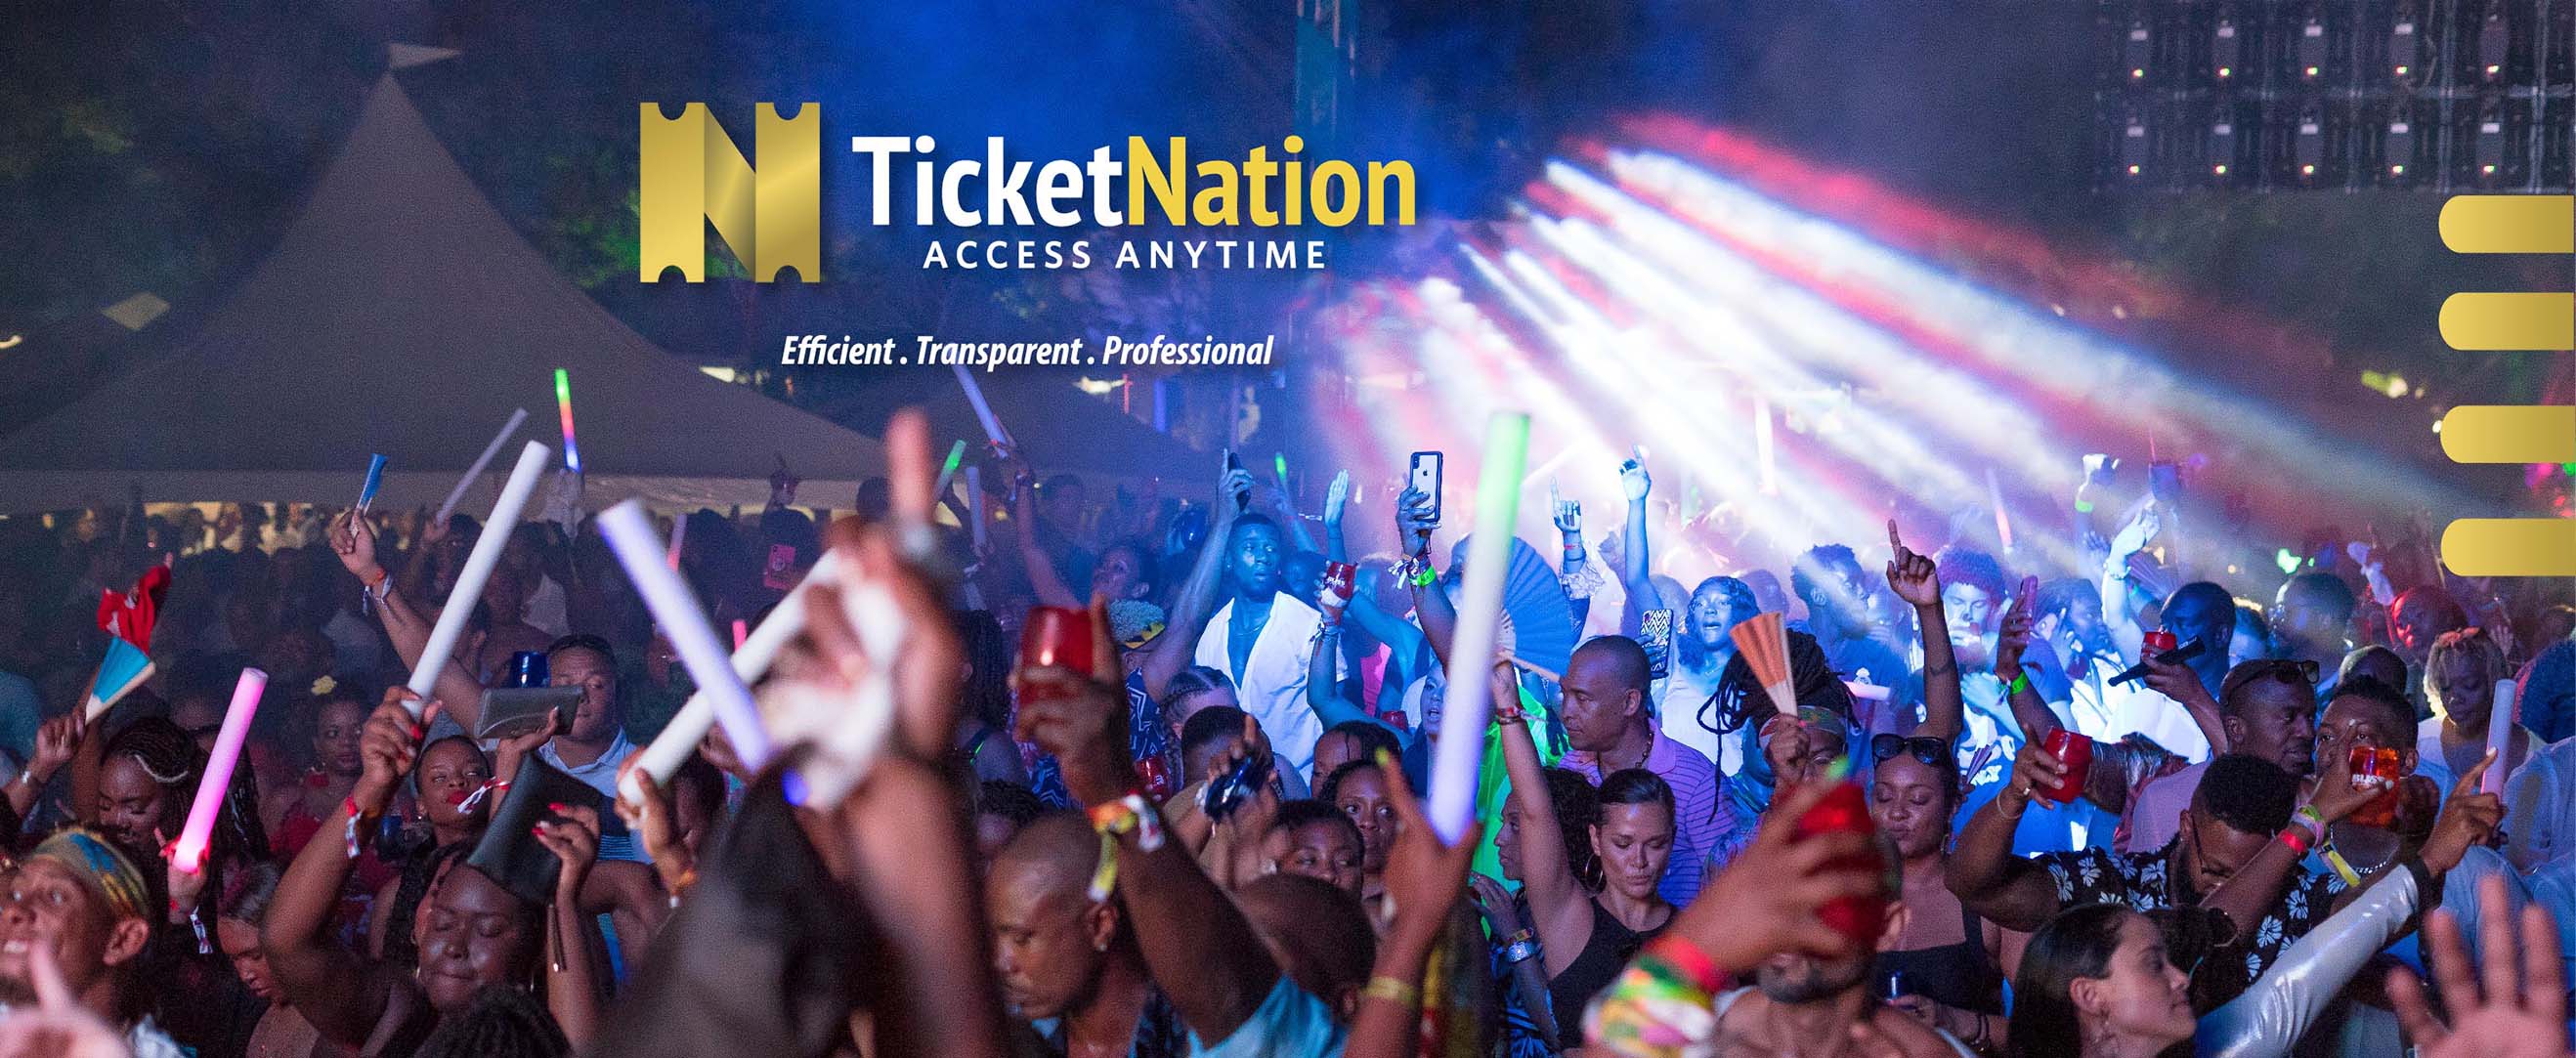 Ticket Nation Access Anytime